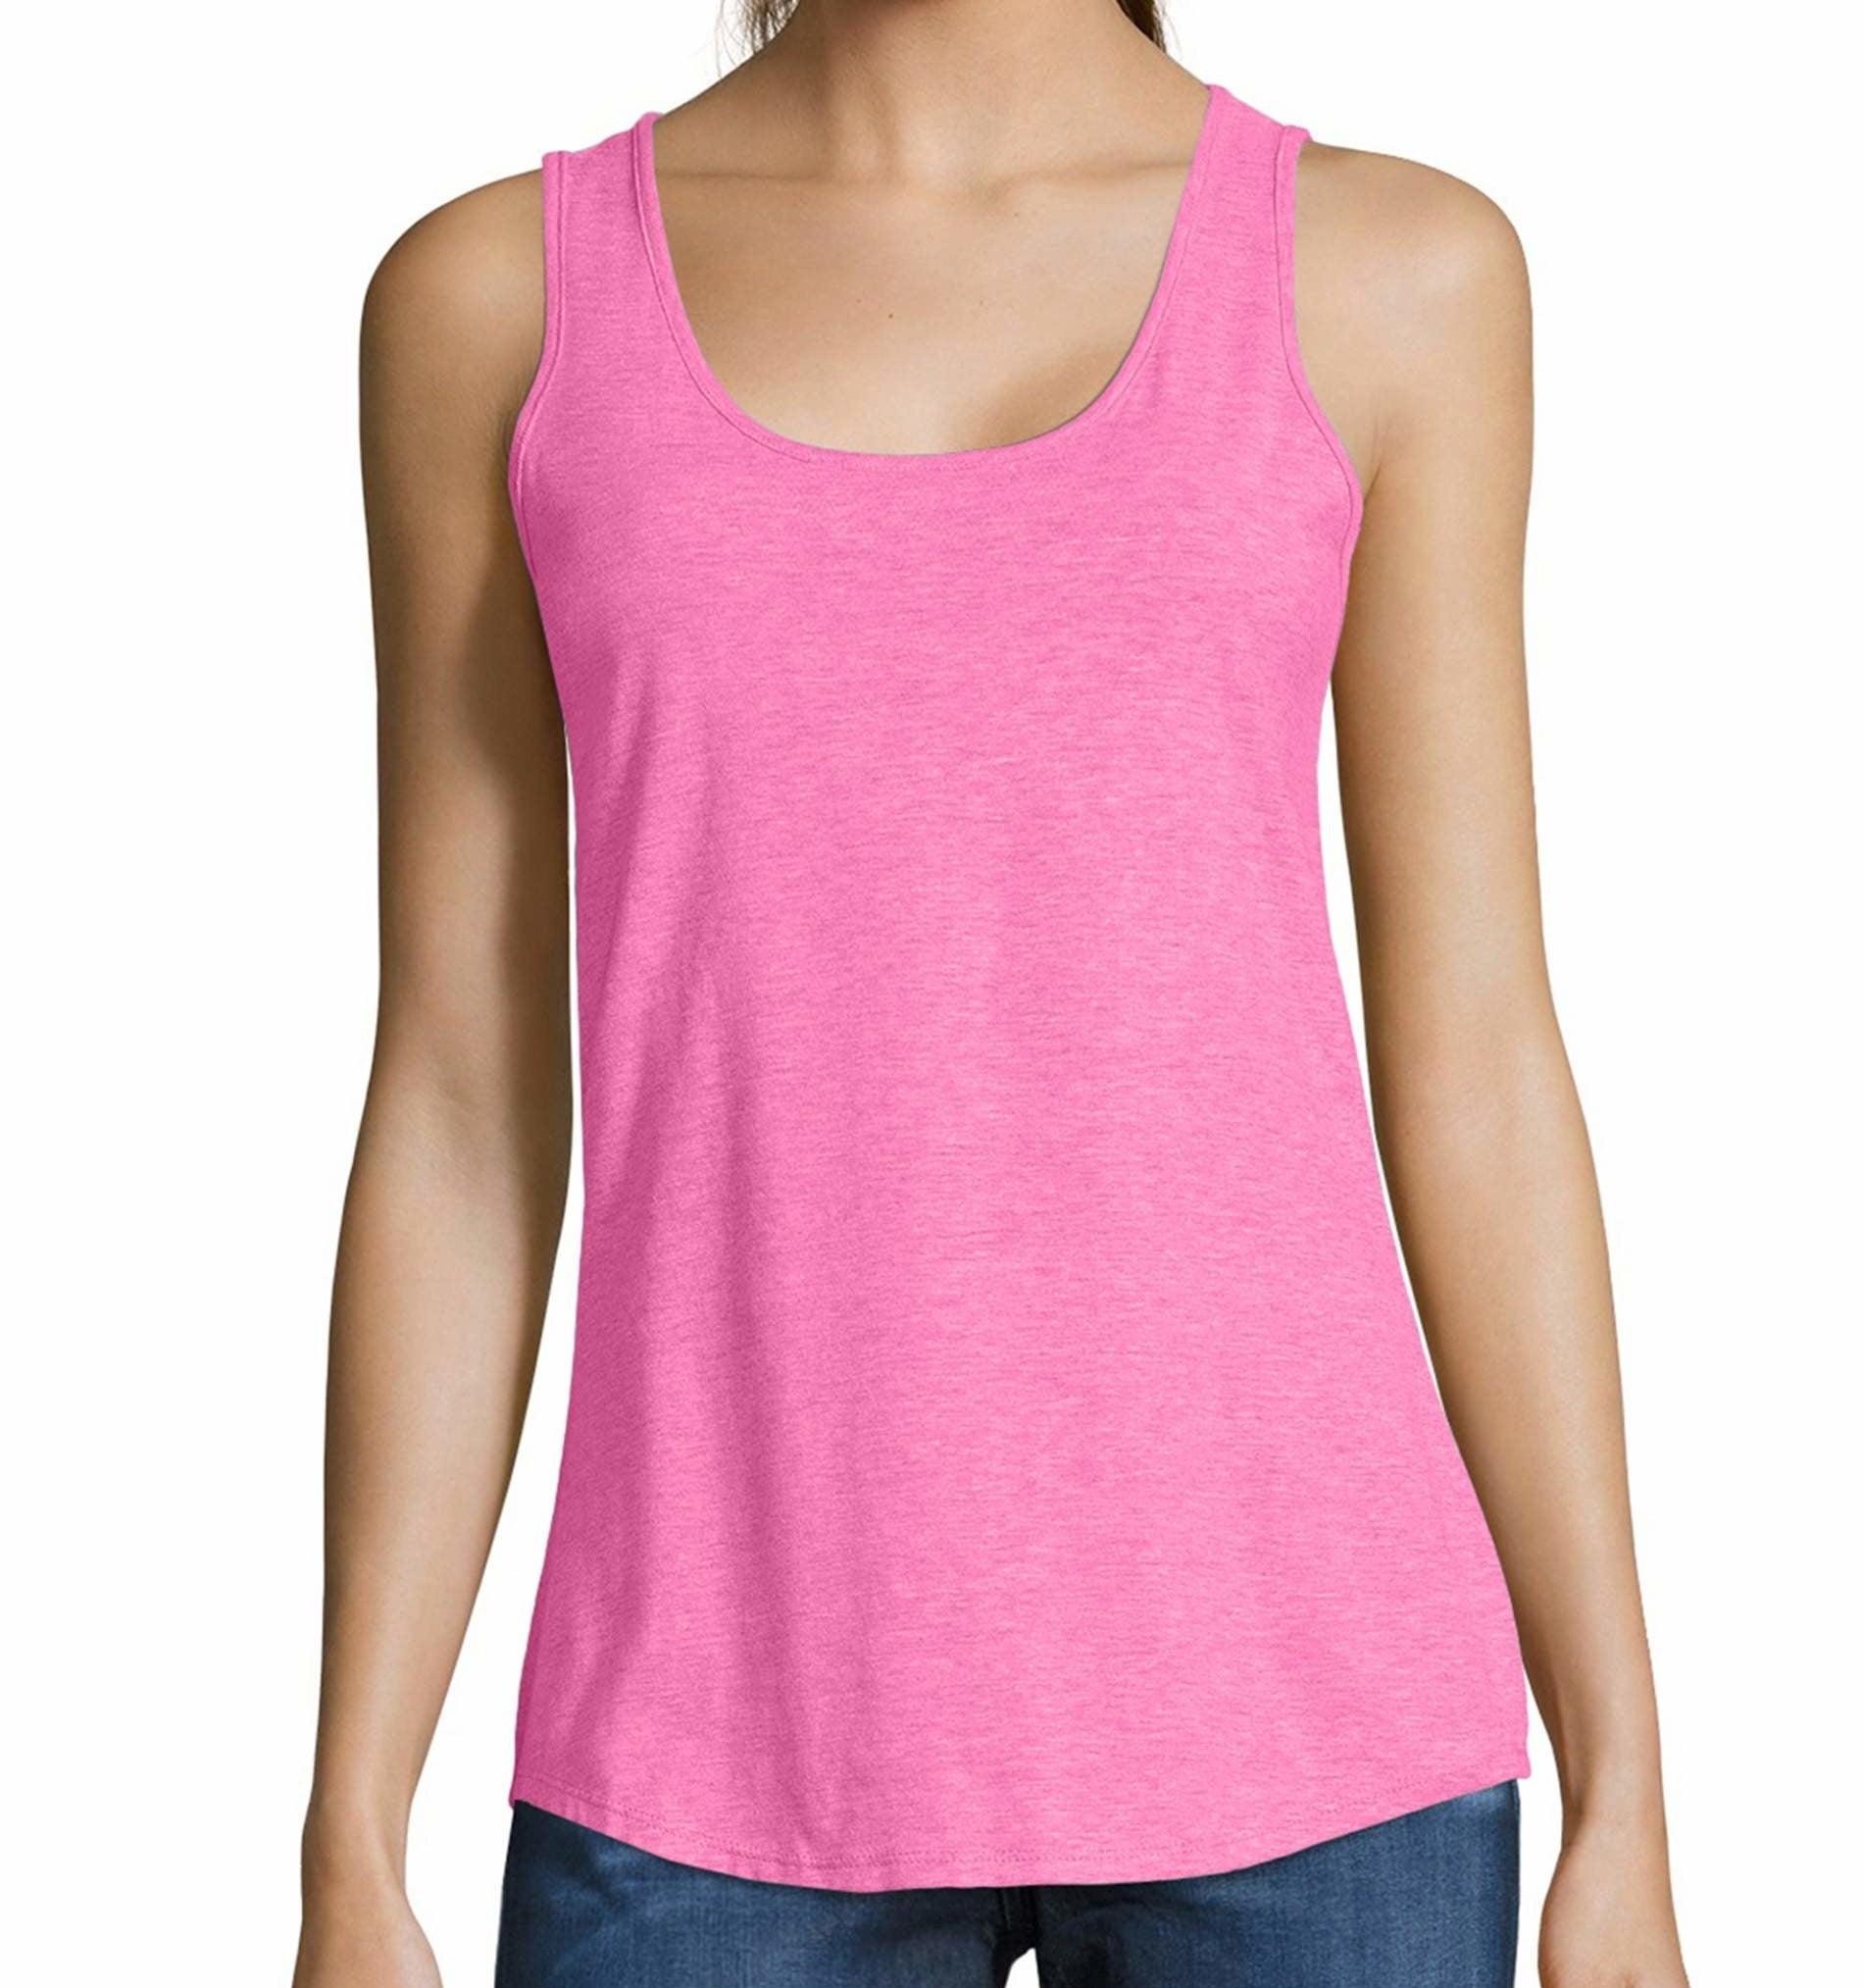 a model in the pink tank top